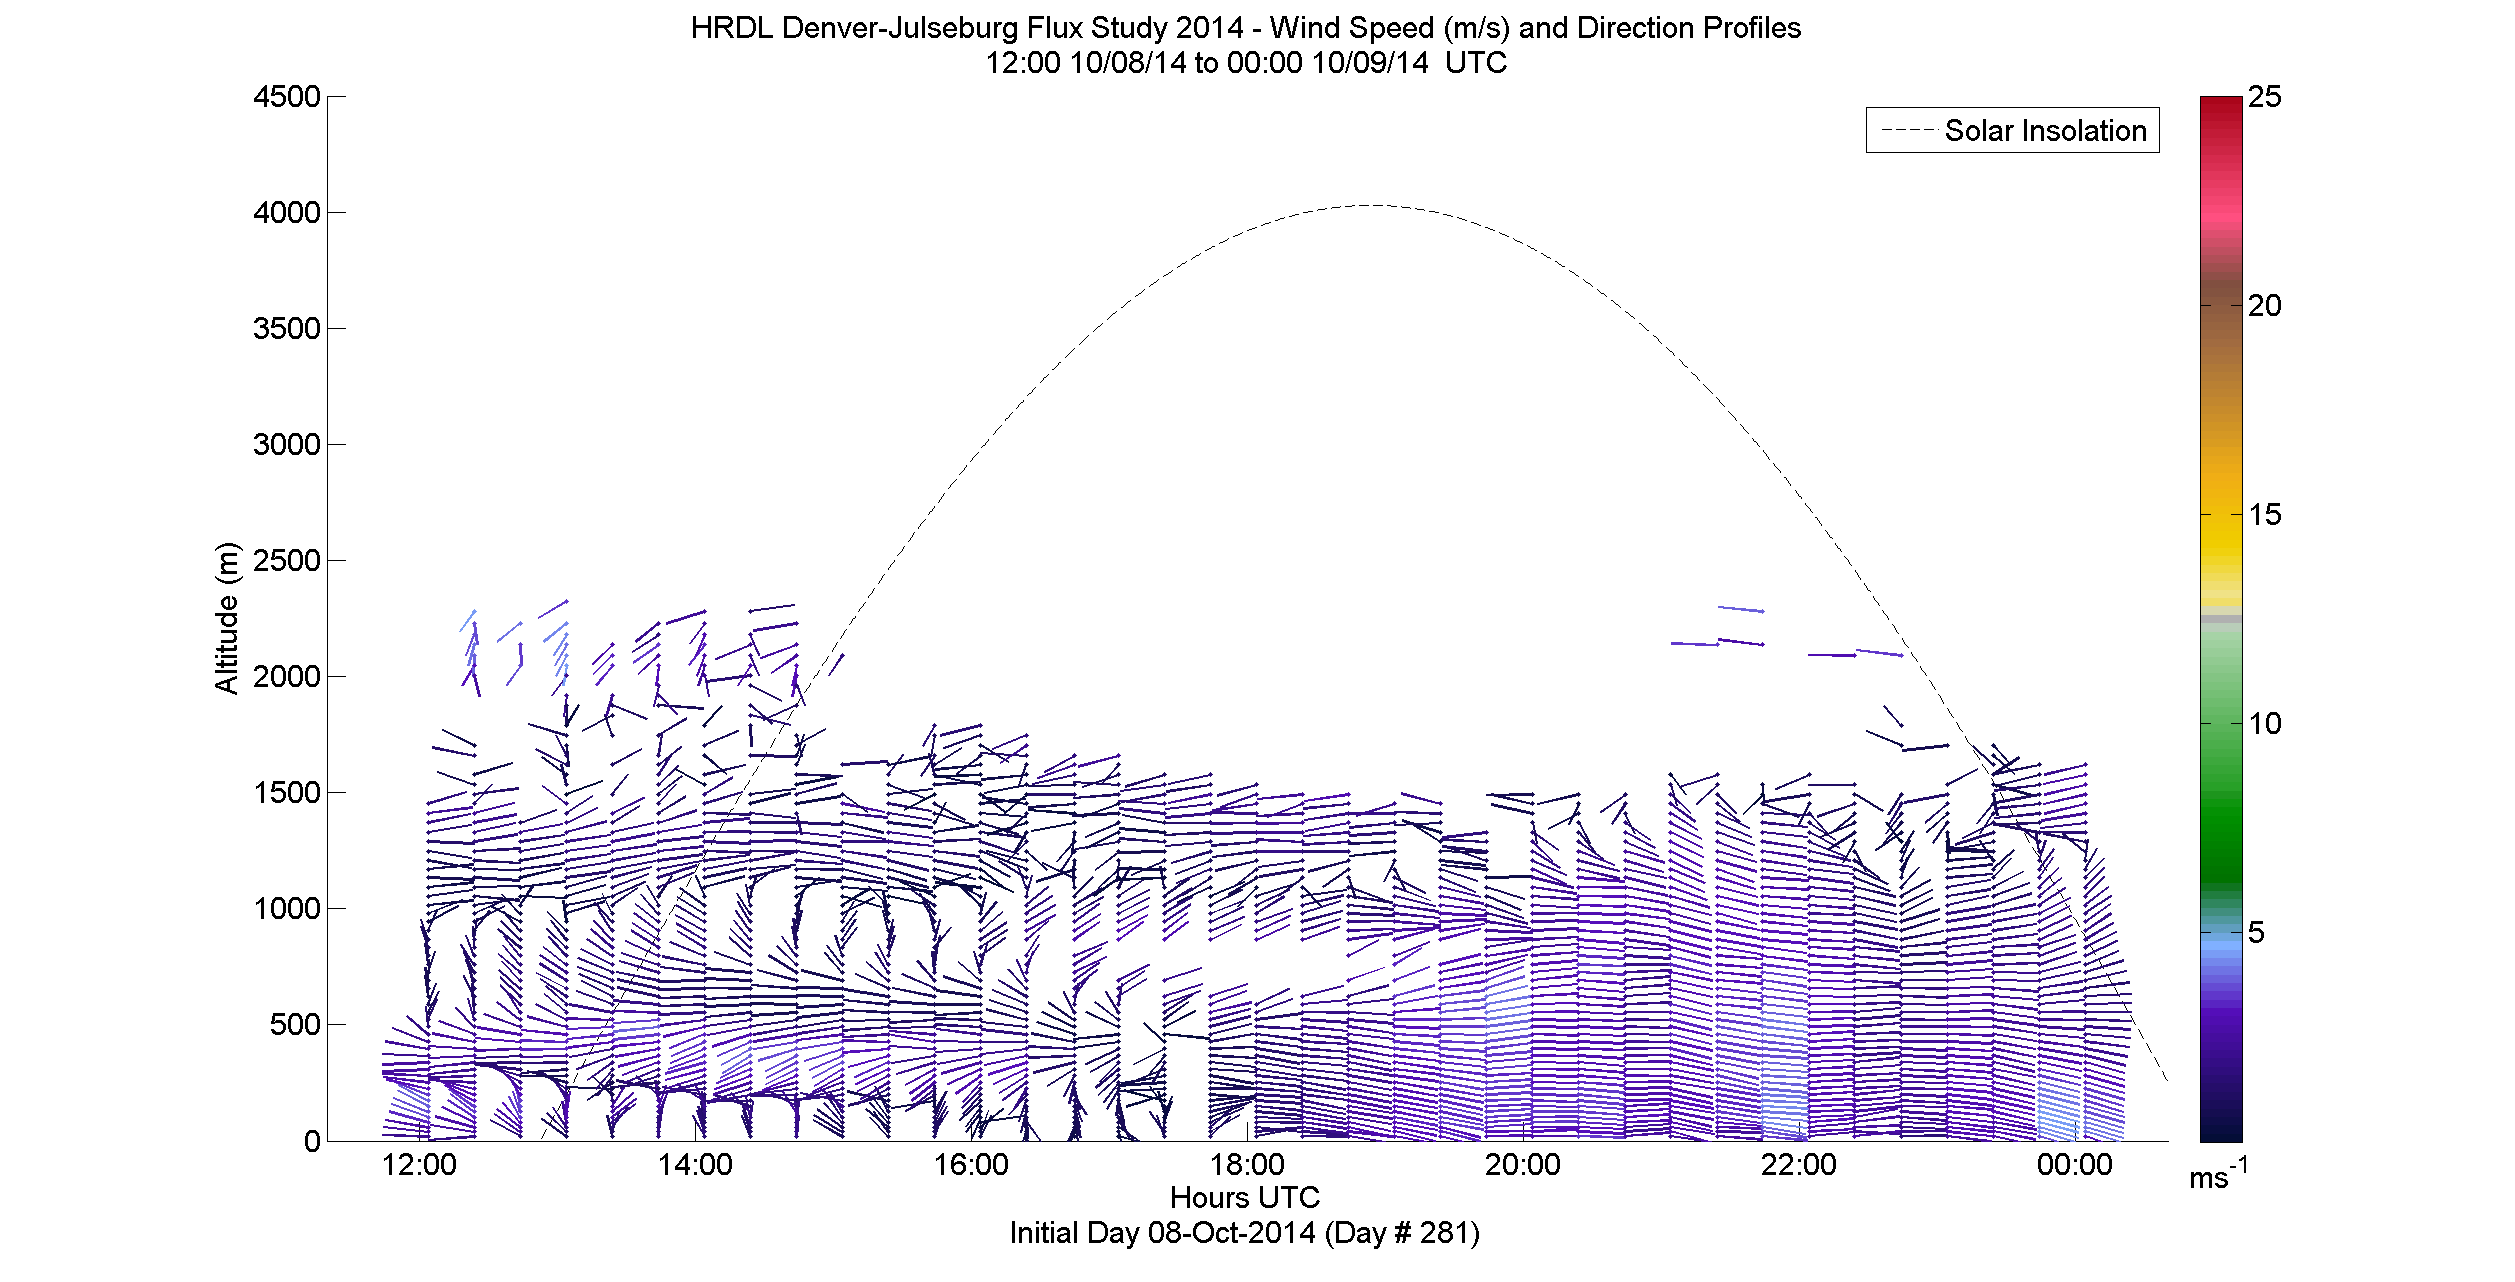 HRDL speed and direction profile - October 8 pm